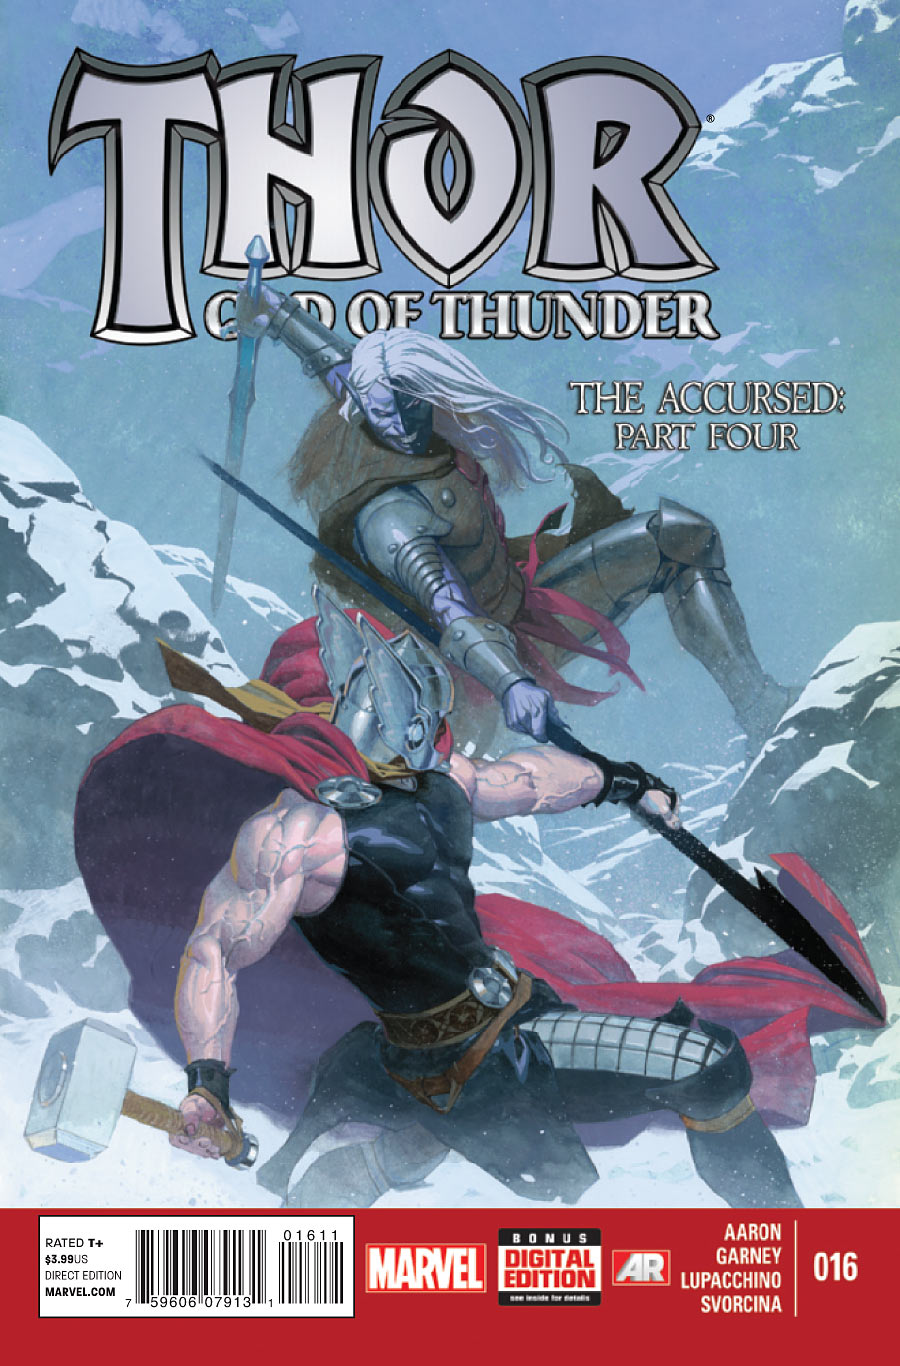 Details about   THOR GOD OF THUNDER #13 NM 9.4 THE ACCURSED PART ONE 1ST PRINT  MARVEL 2013 